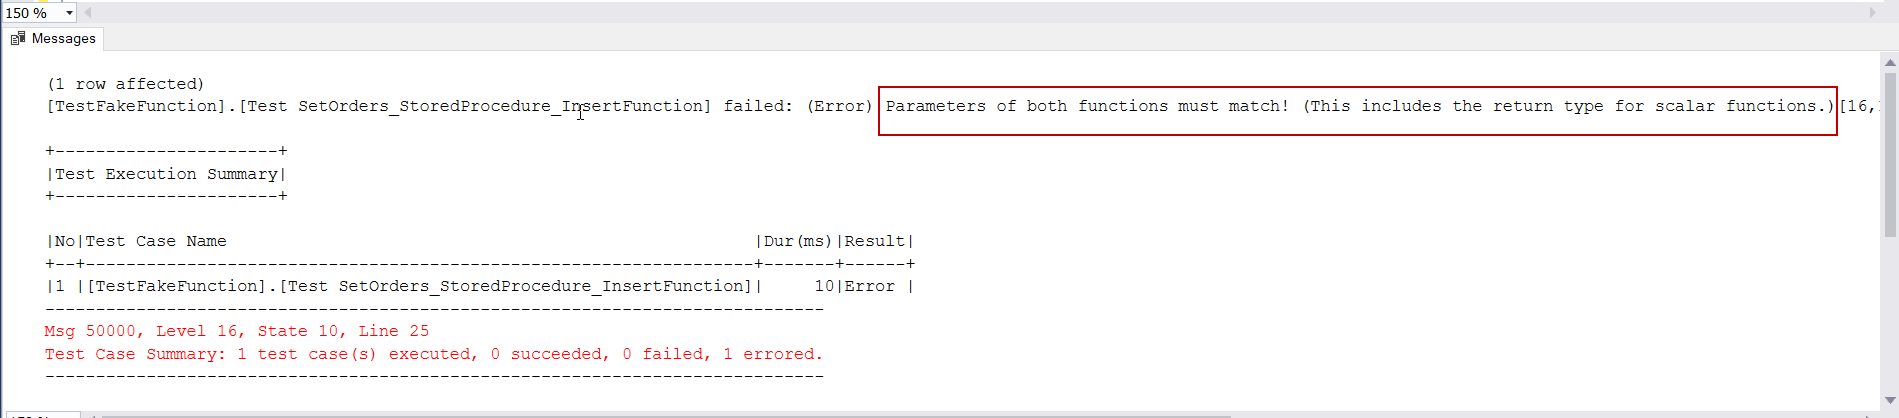 FakeFunction parameters of both functions must match error image.